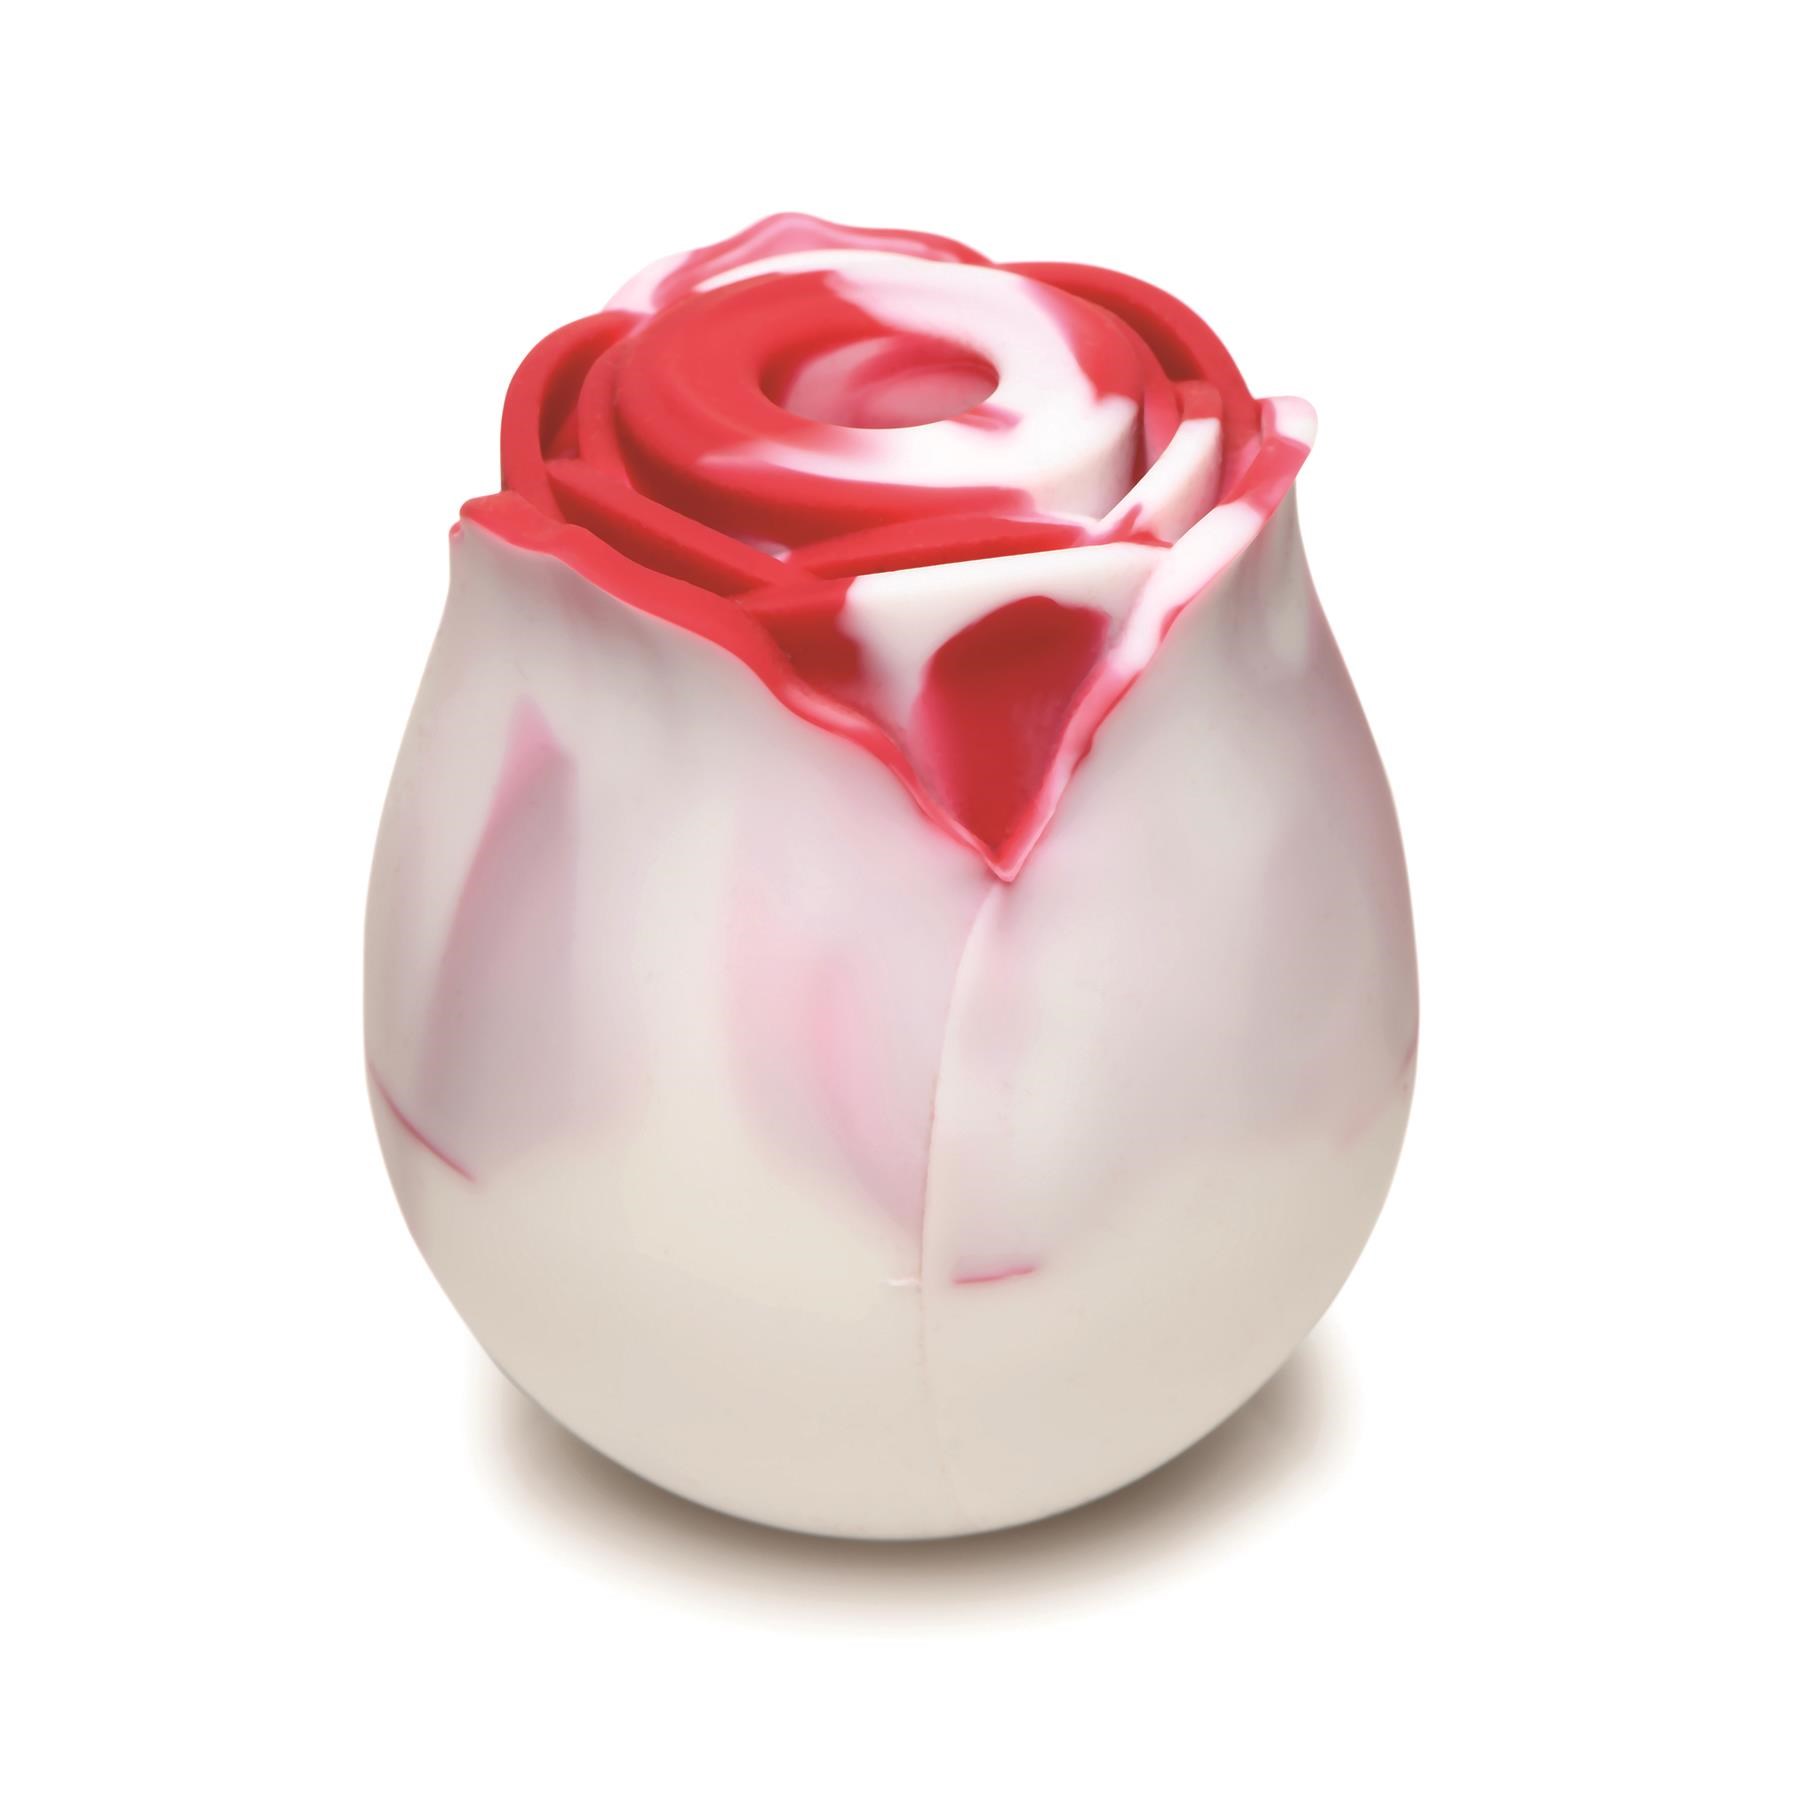 Bloomgasm Rose Lover's Heart Gift Box - Rose Vibrator Shot - Red and White